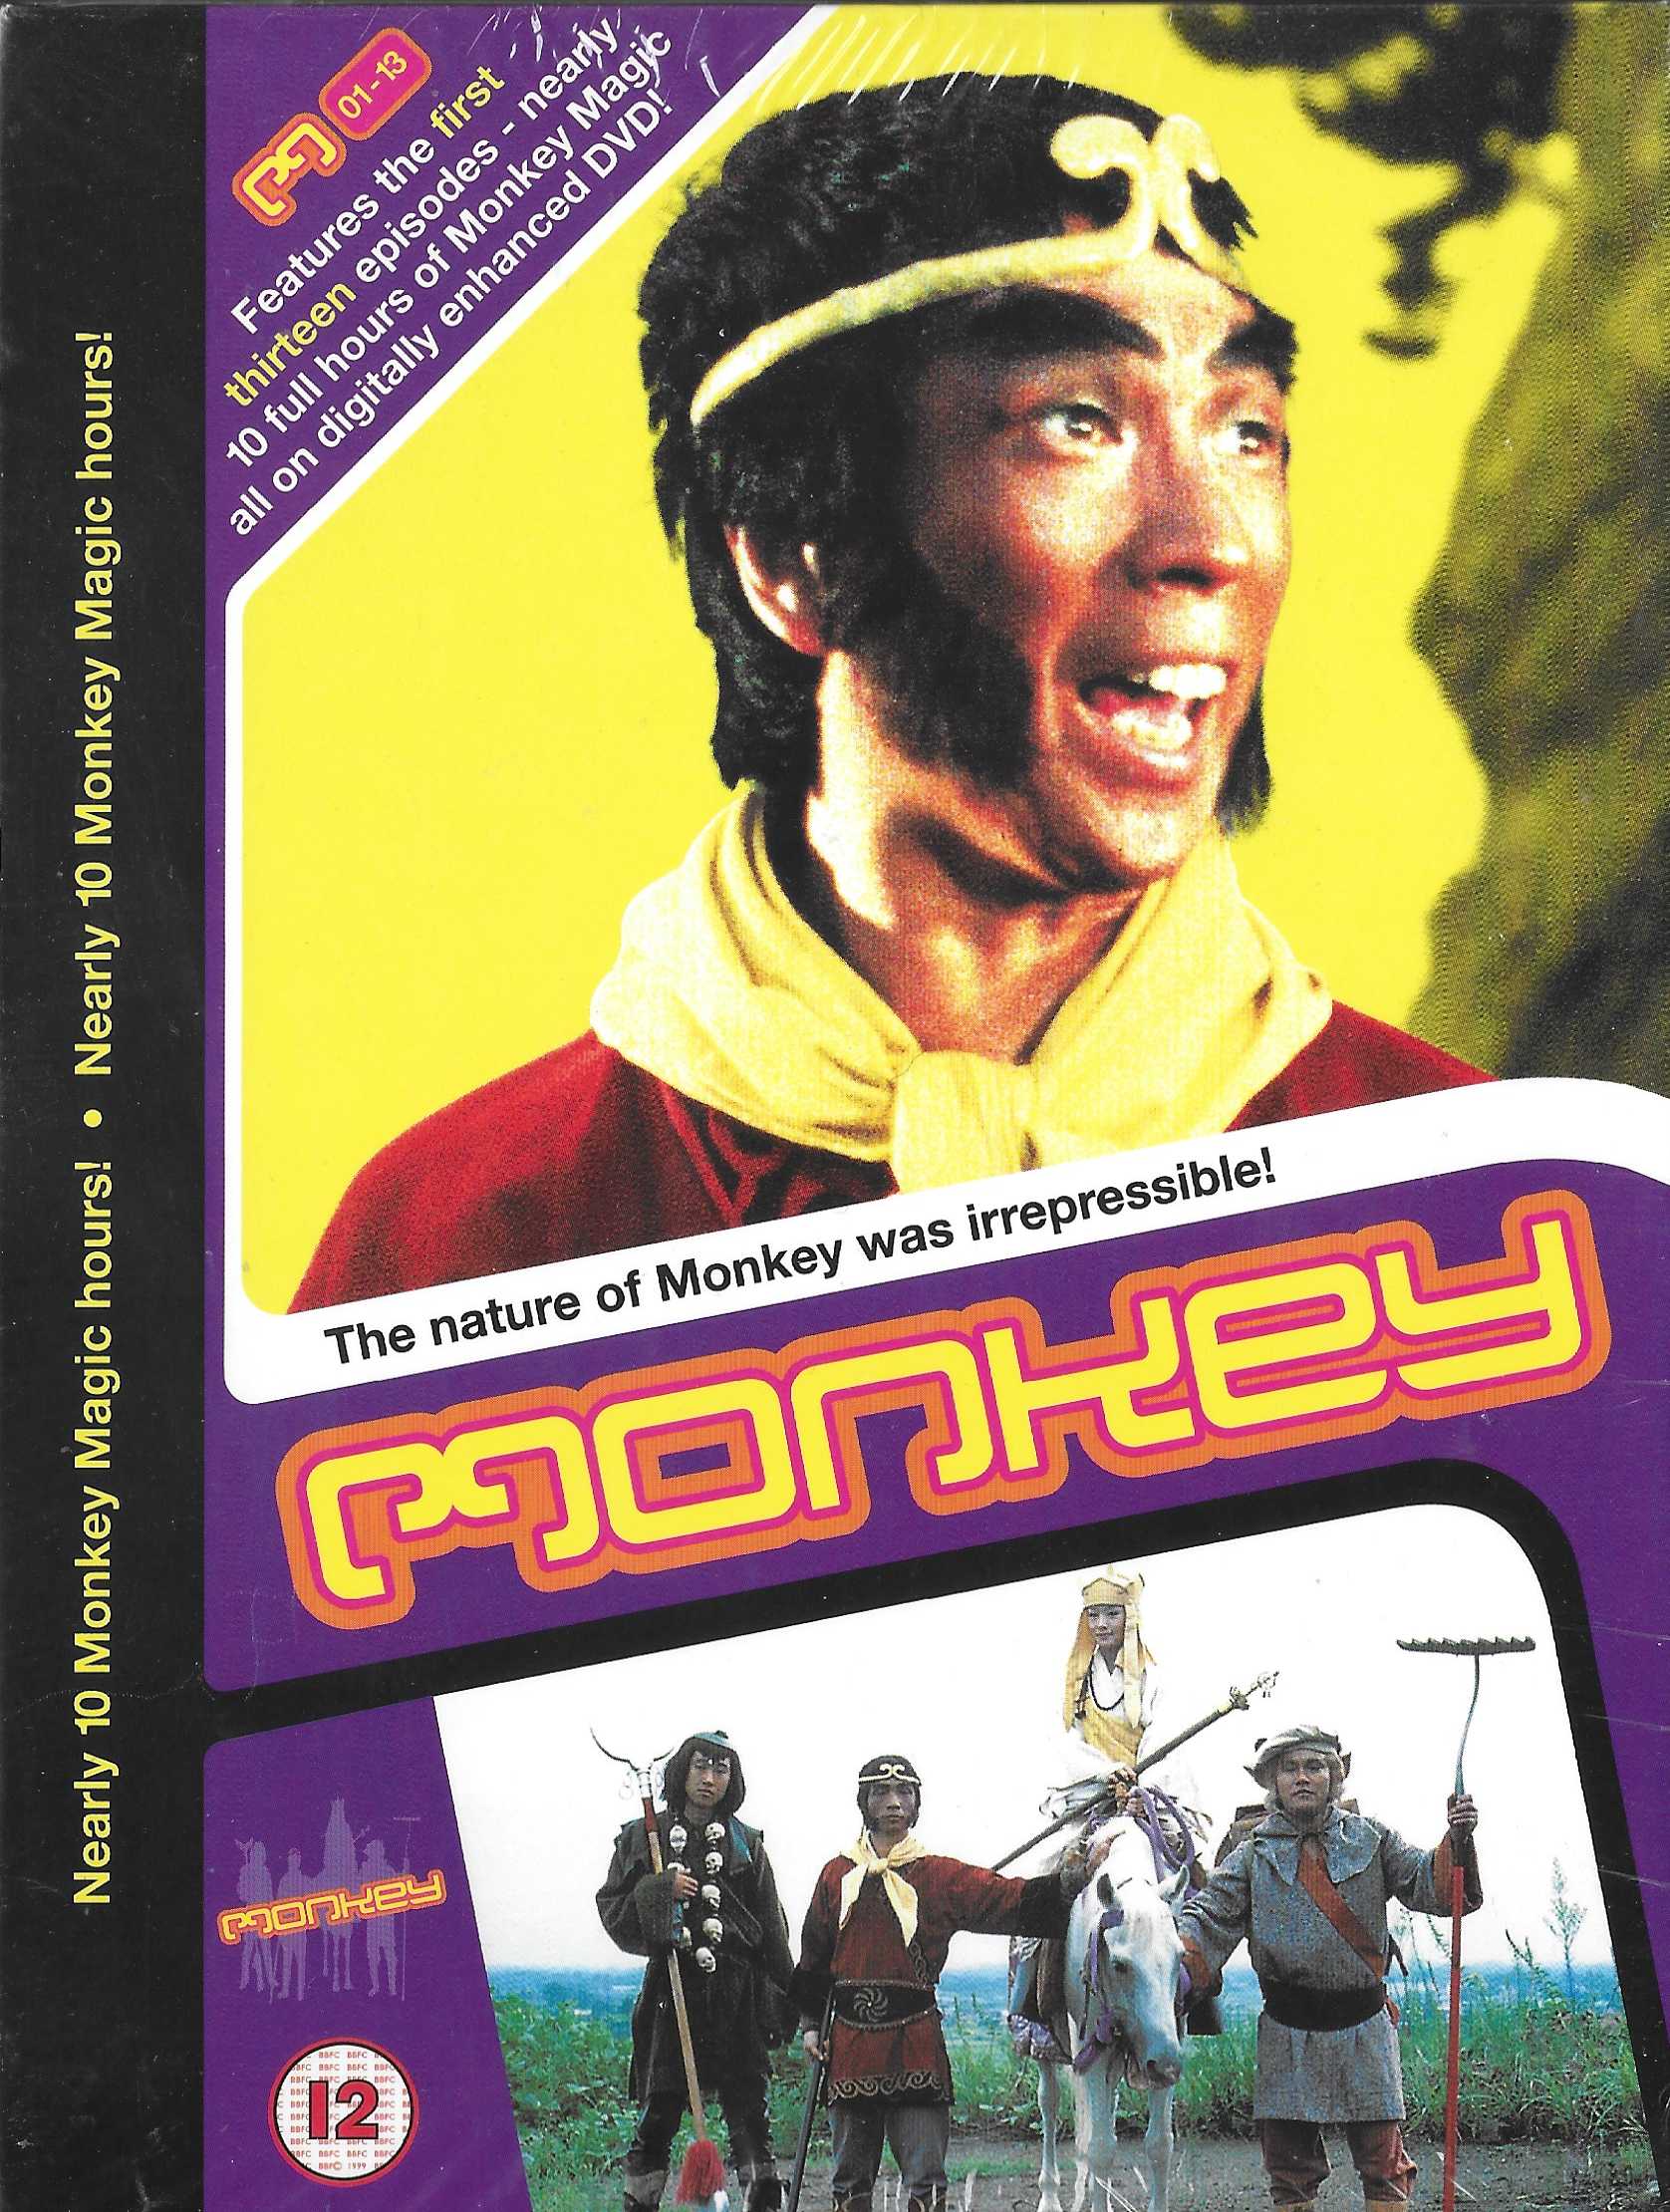 Picture of Monkey - Series 1A by artist David Weir from the BBC dvds - Records and Tapes library